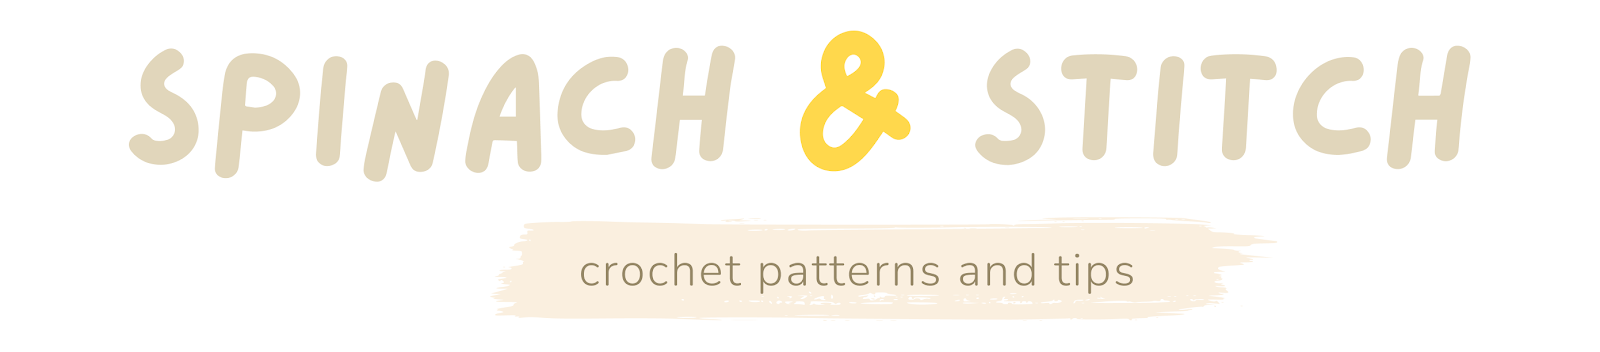 Spinach and Stitch Crochet Blog - Crochet Patterns and Tips